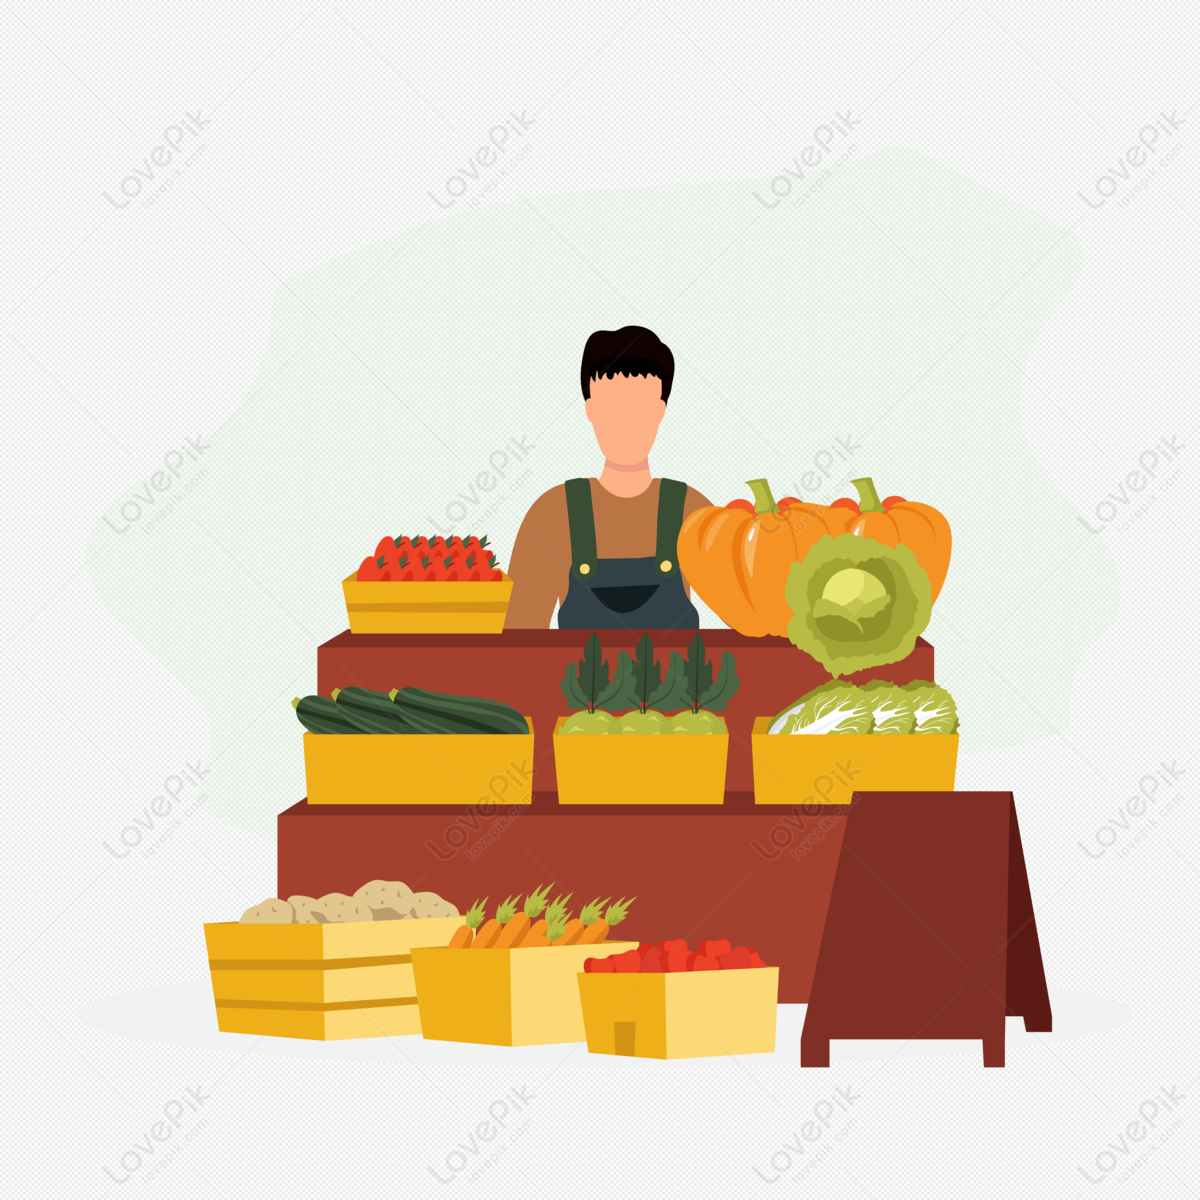 Farmer Selling Vegetables PNG Transparent And Clipart Image For Free  Download - Lovepik | 401251386